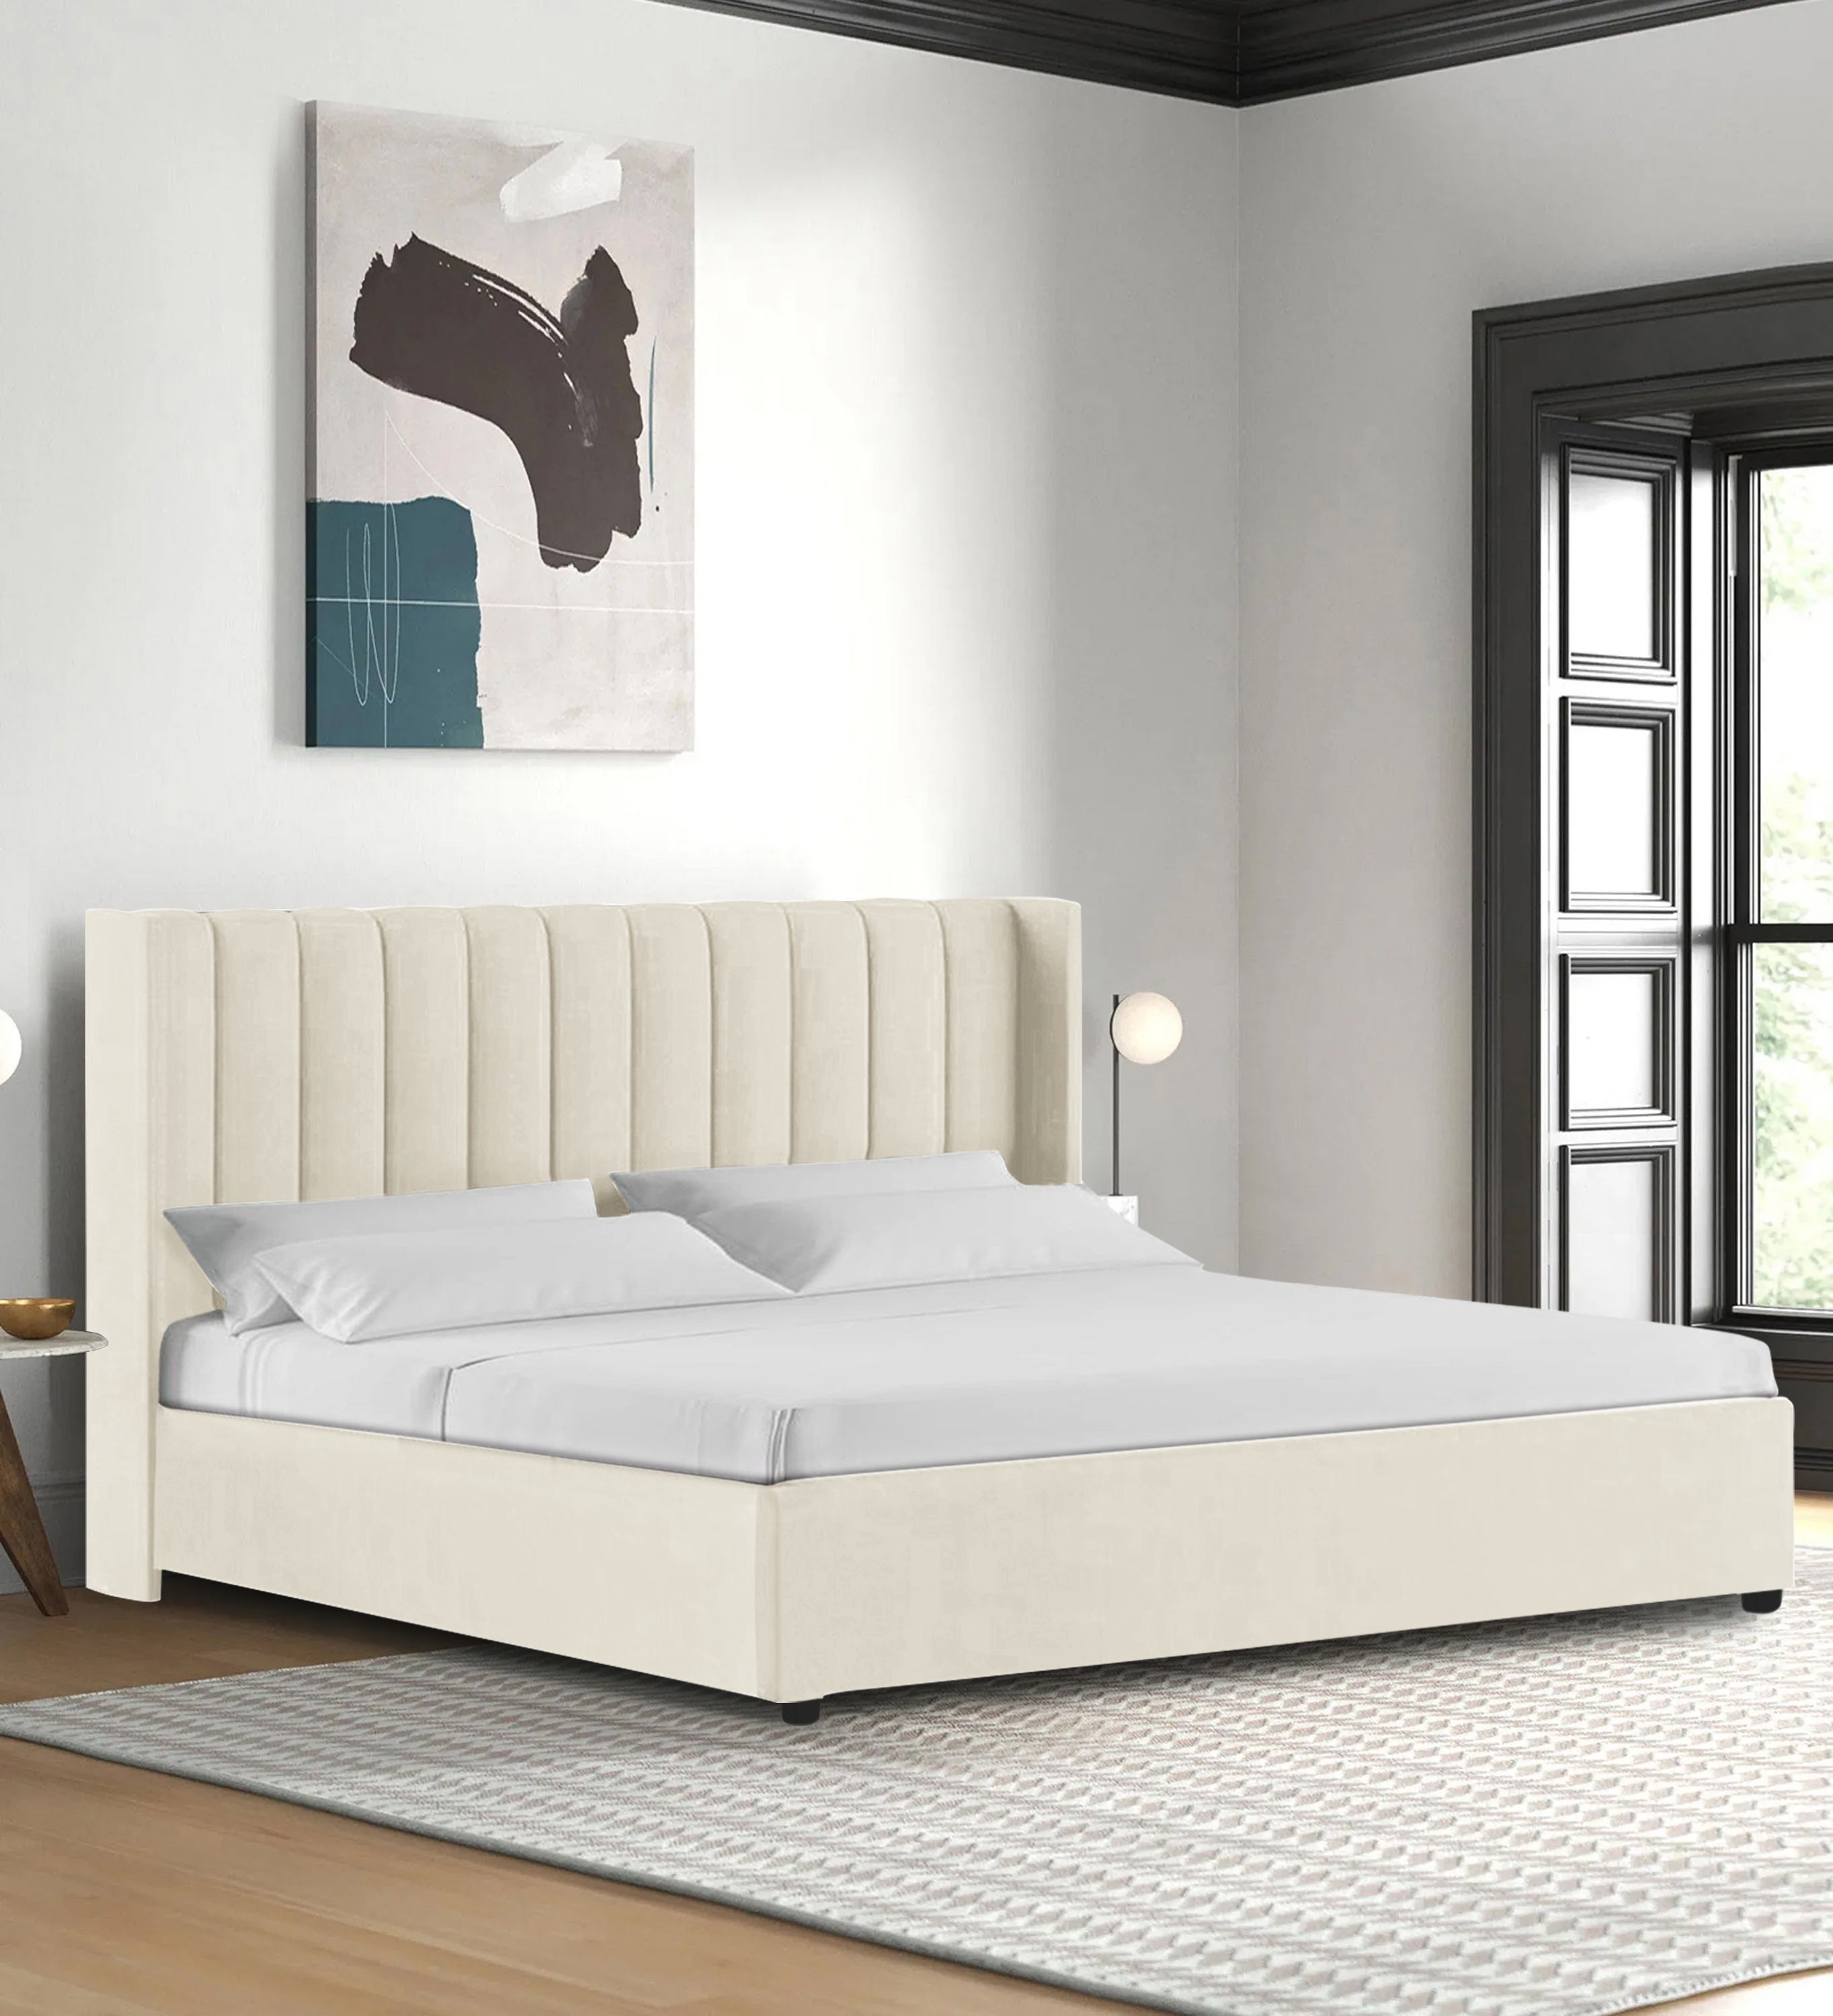 Colina Fabric King Size Bed In Ivory Cream Colour With Box Storage